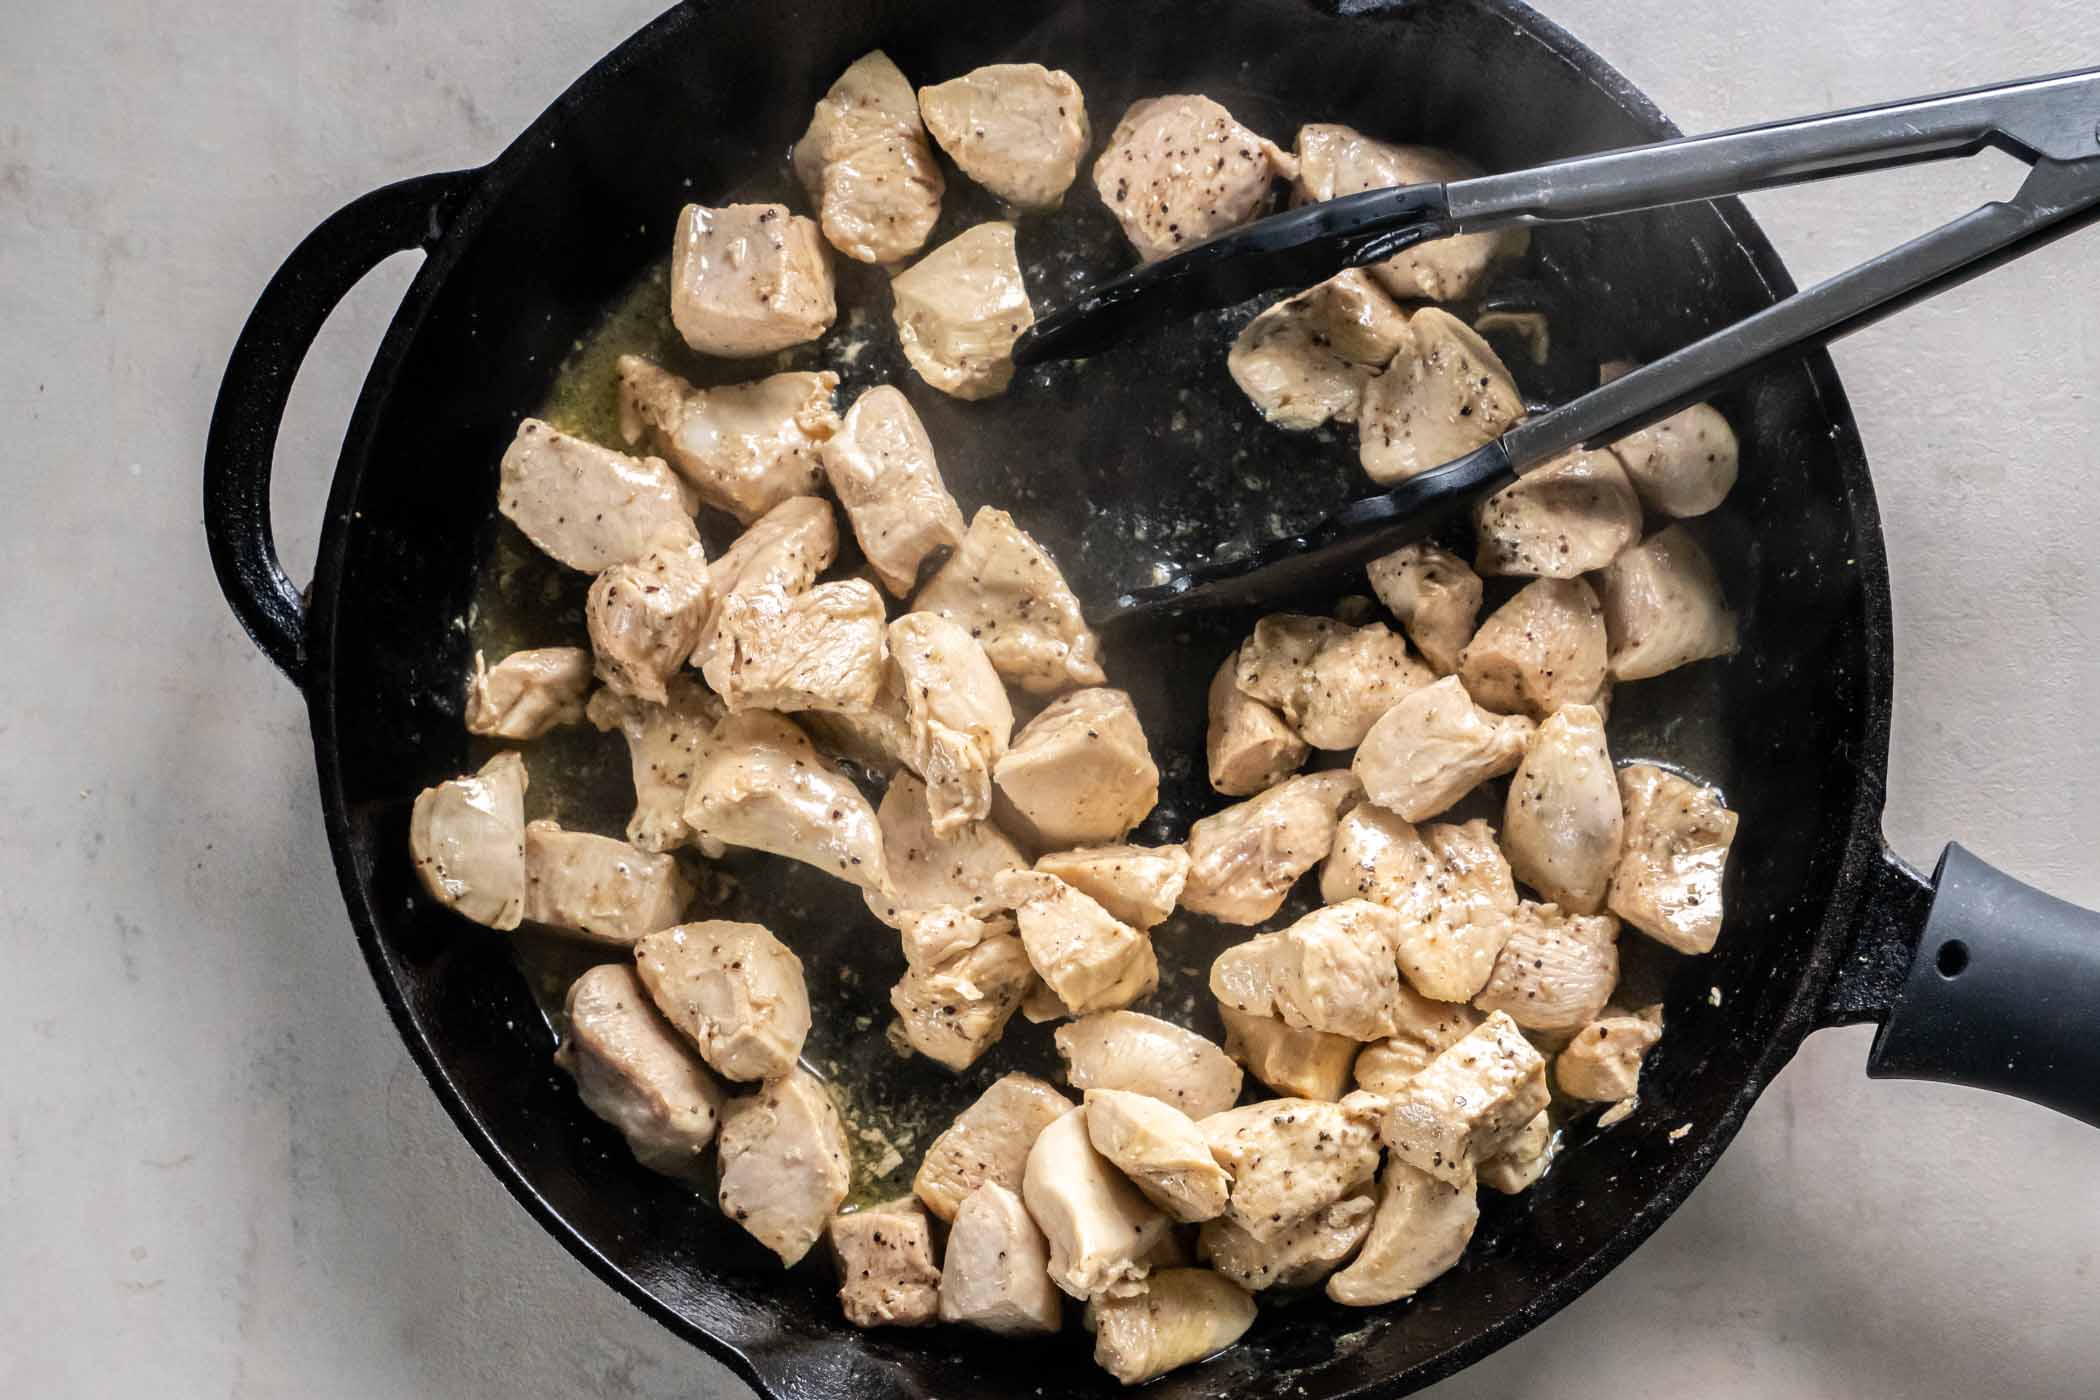 Cooking chicken pieces in a cast iron skillet.